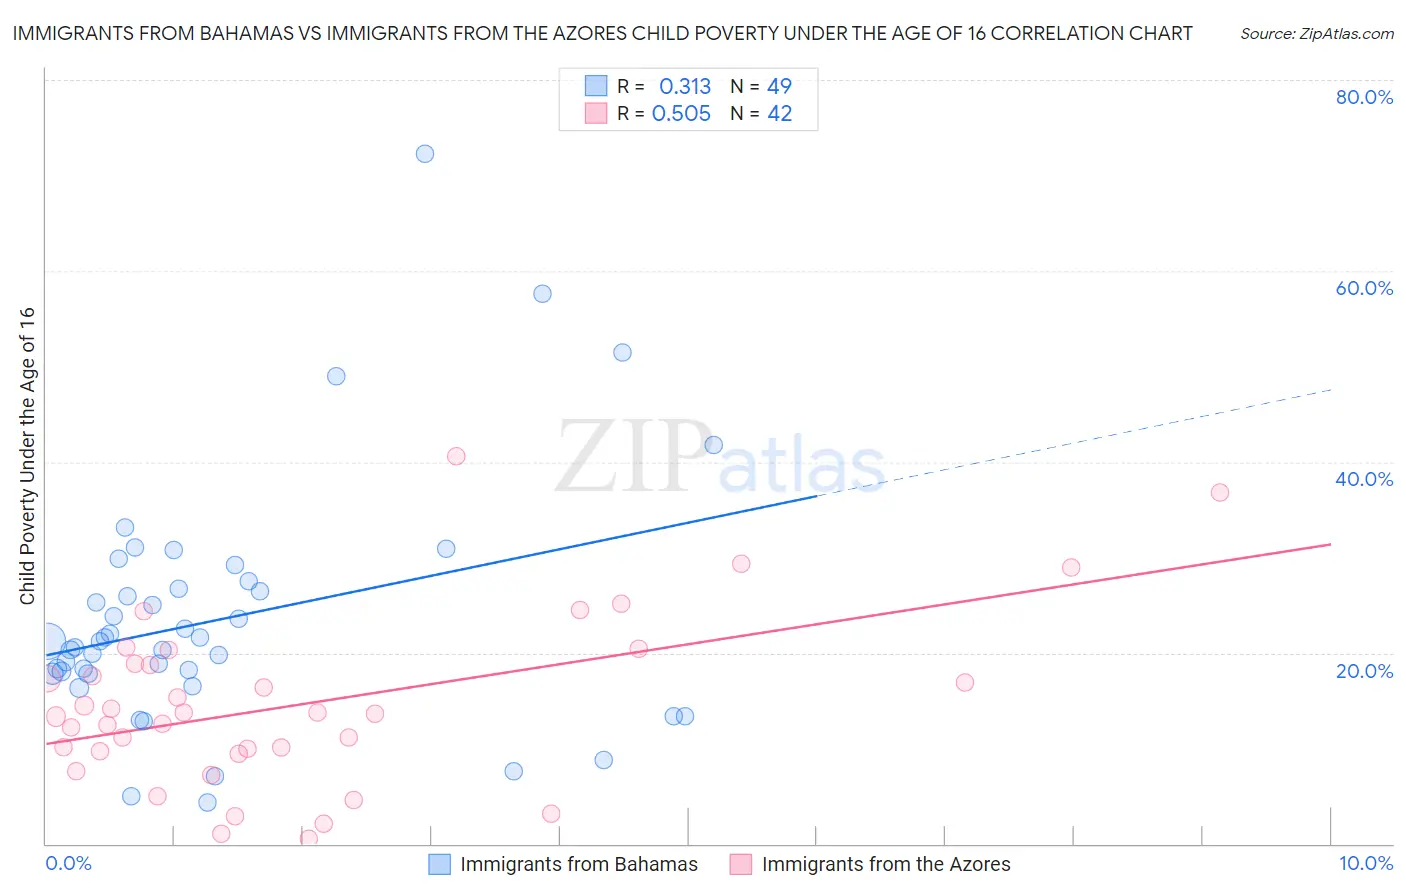 Immigrants from Bahamas vs Immigrants from the Azores Child Poverty Under the Age of 16